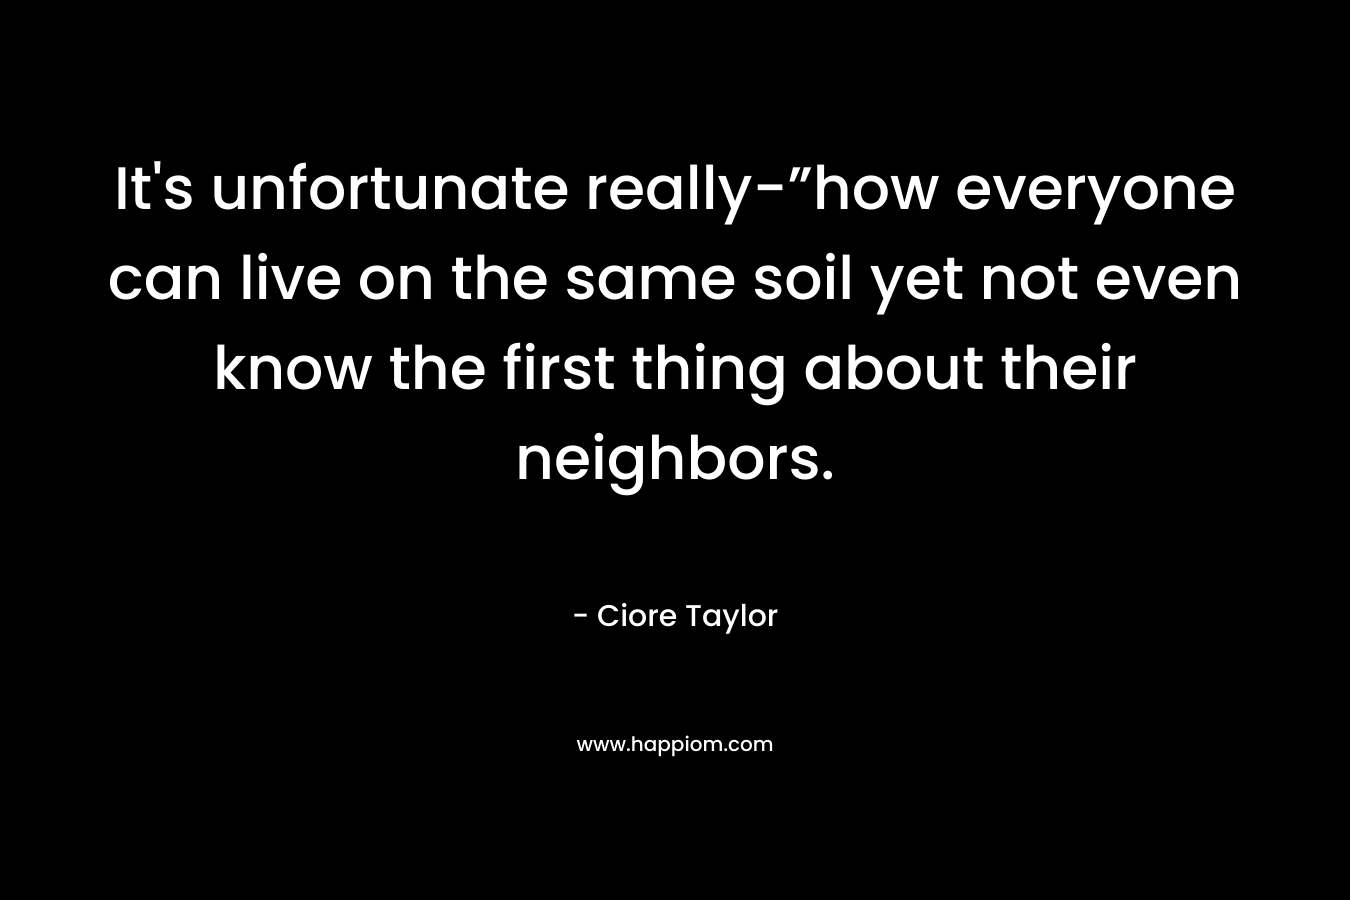 It’s unfortunate really-”how everyone can live on the same soil yet not even know the first thing about their neighbors. – Ciore Taylor